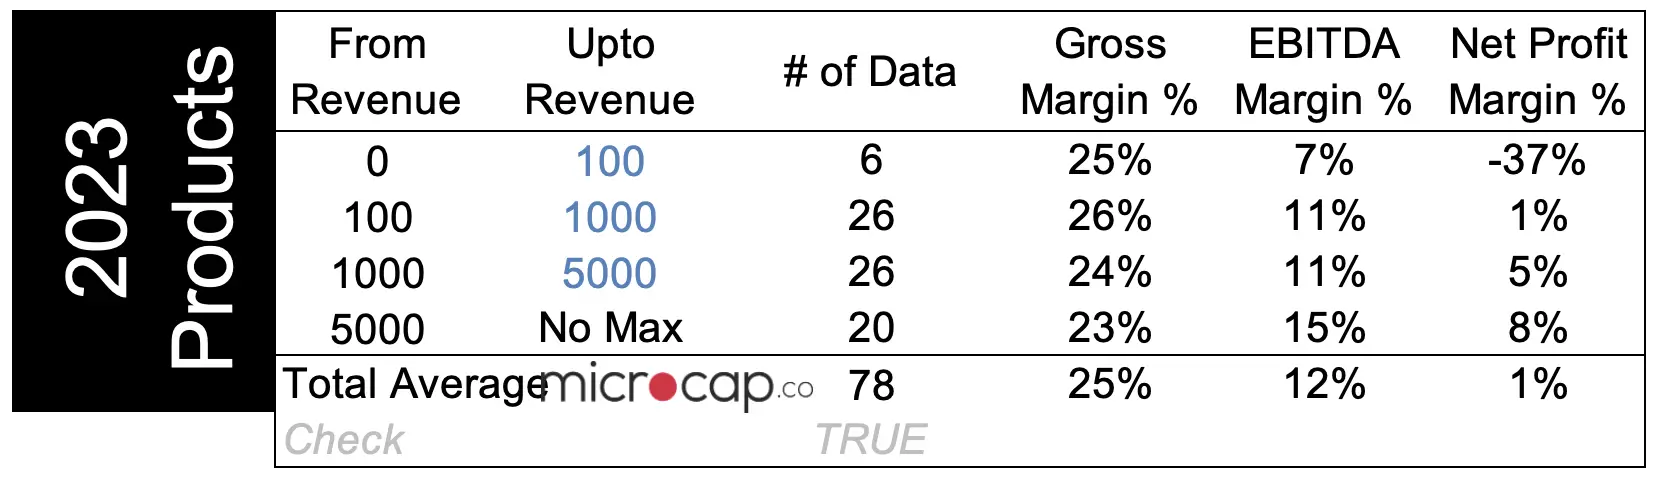 Food Company Valuation Multiples